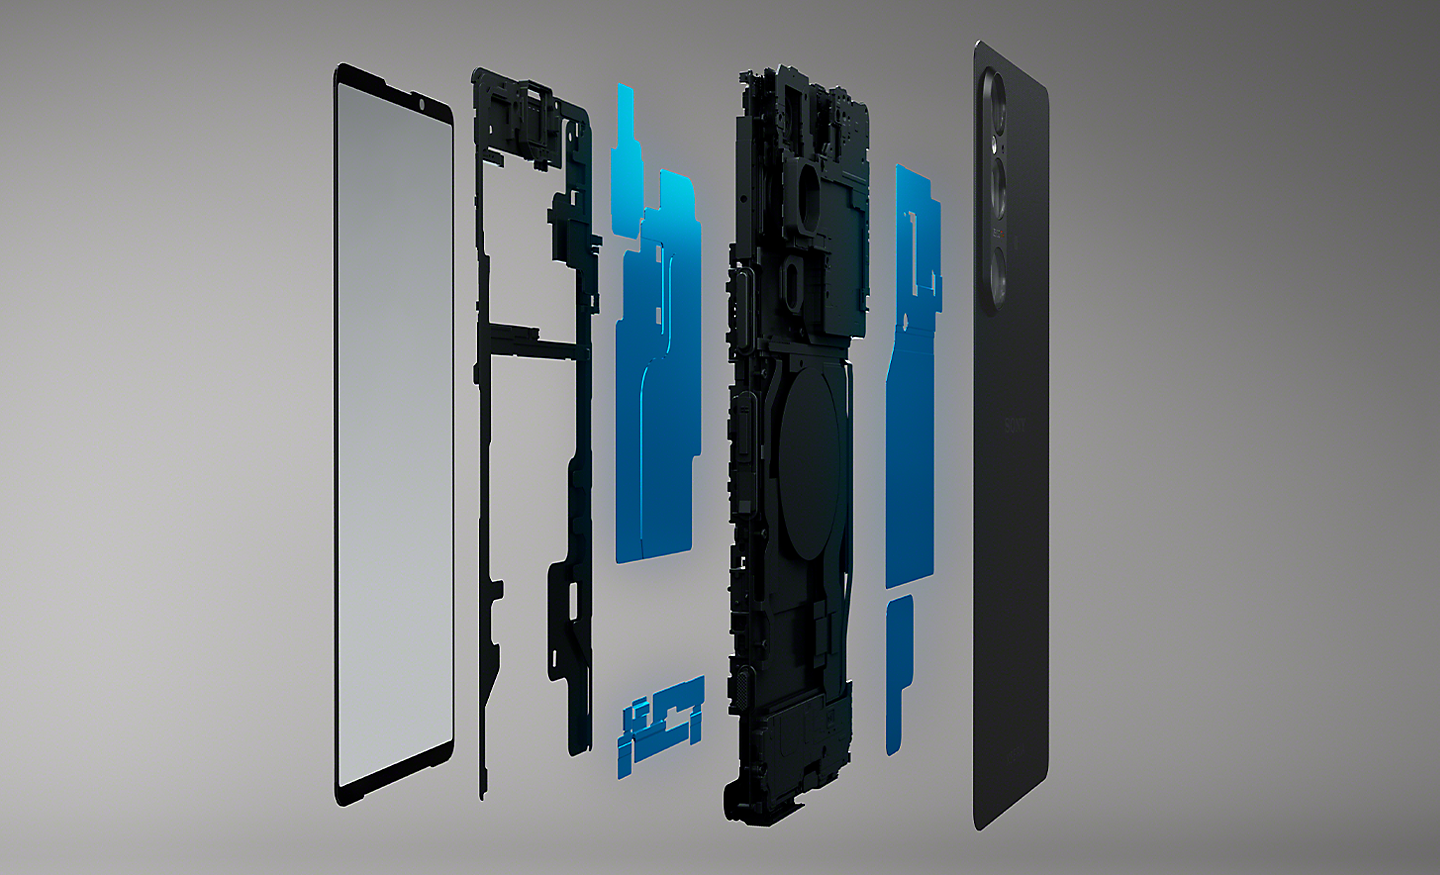 Exploded view showing the heat diffusion sheet within the Xperia 1 V